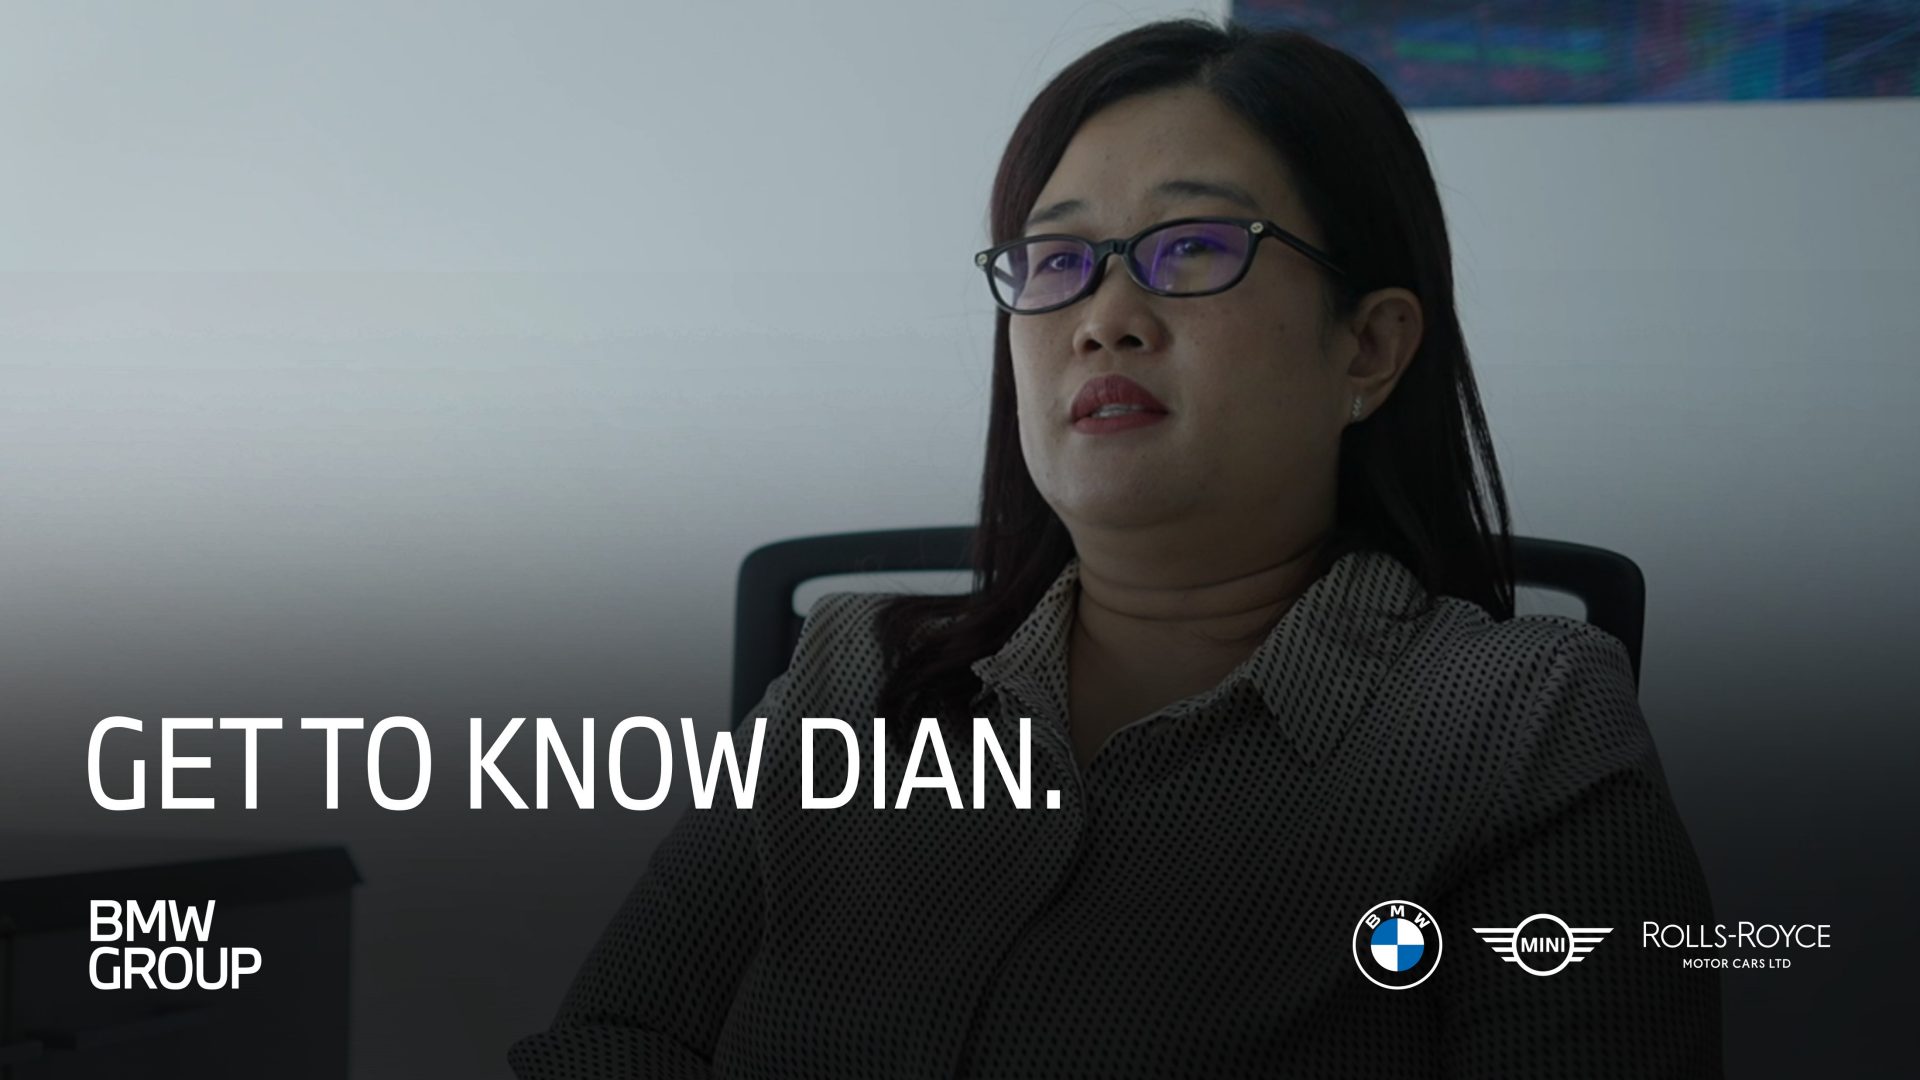 Get to know Dian.